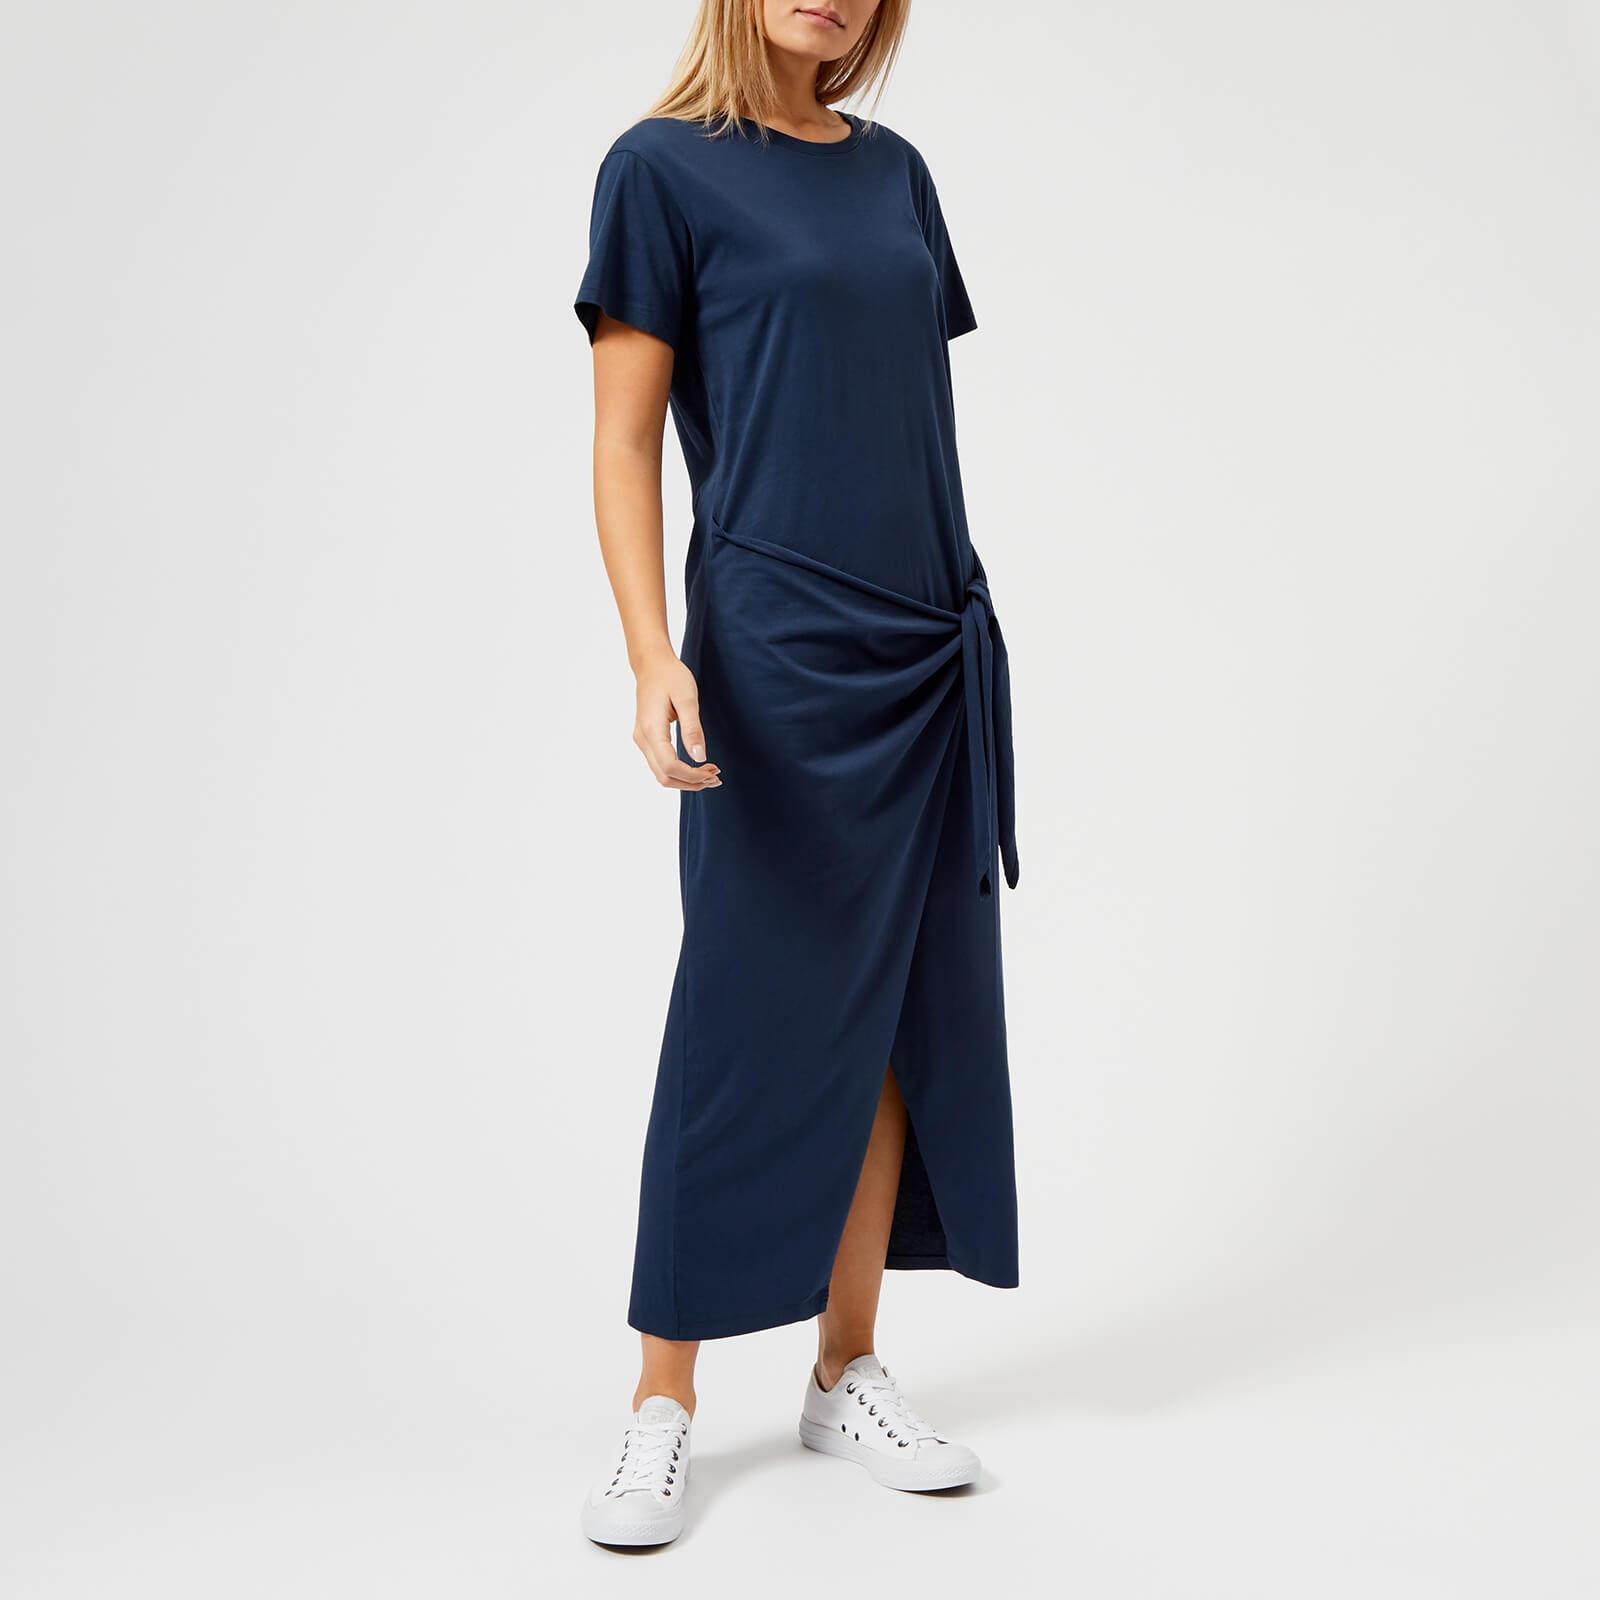 Polo Ralph Lauren Cotton T-shirt Dress With Tie Front in Navy (Blue) | Lyst